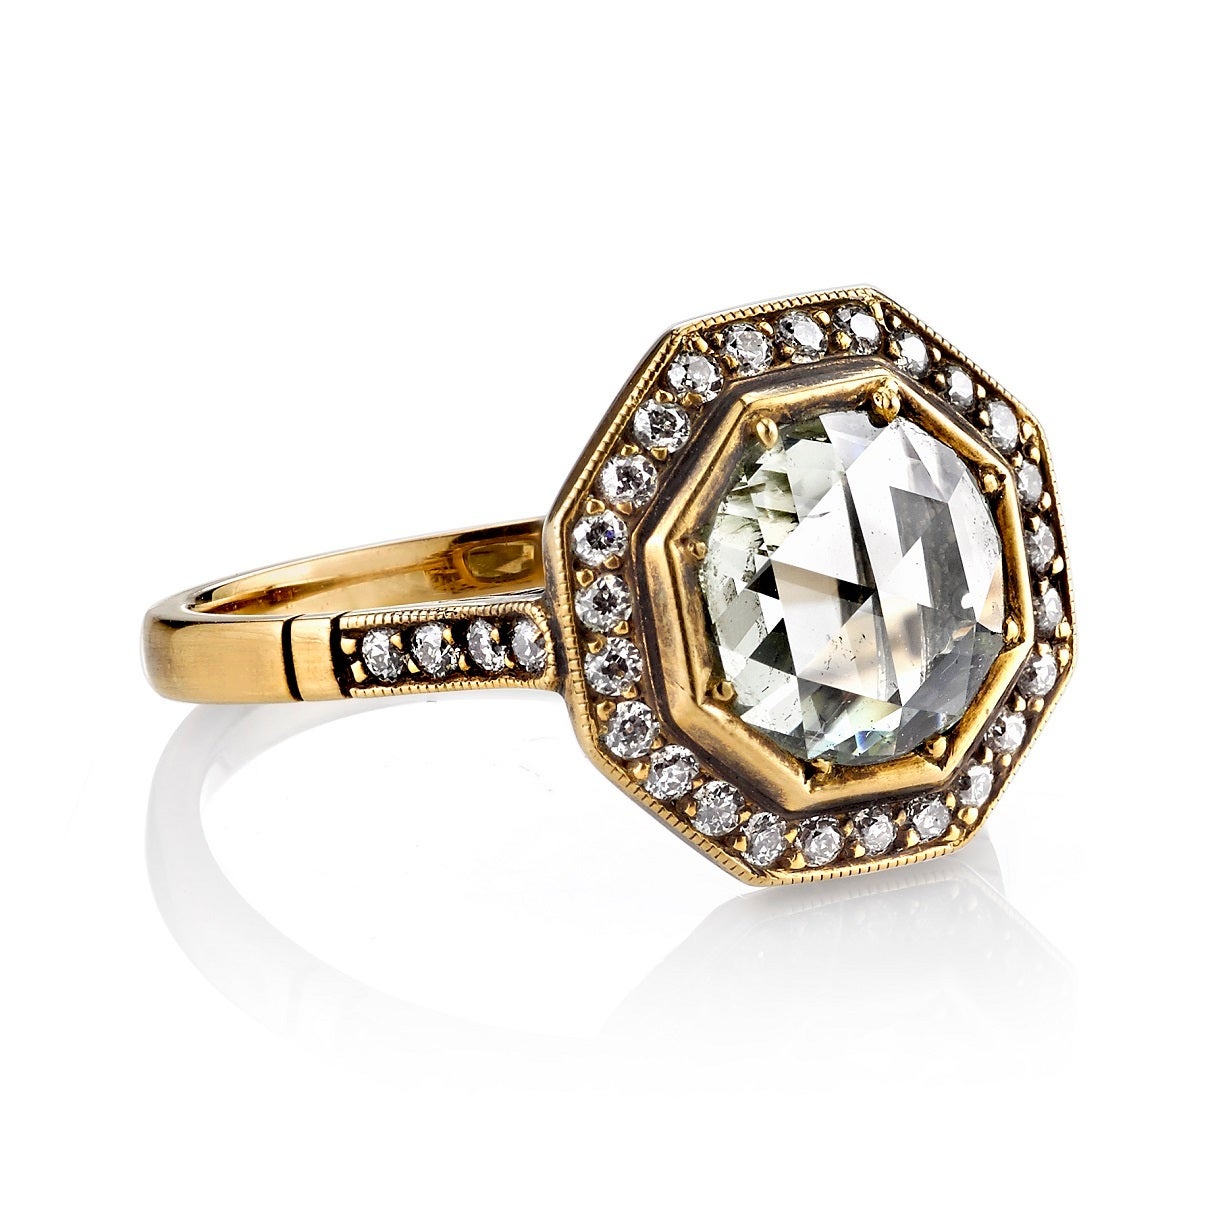 1.15ct Light Yellow. SI2 Rose cut diamond set in a handcrafted 18k oxidized yellow gold mounting. An octagonal halo design featuring a low profile and intricate gallery.